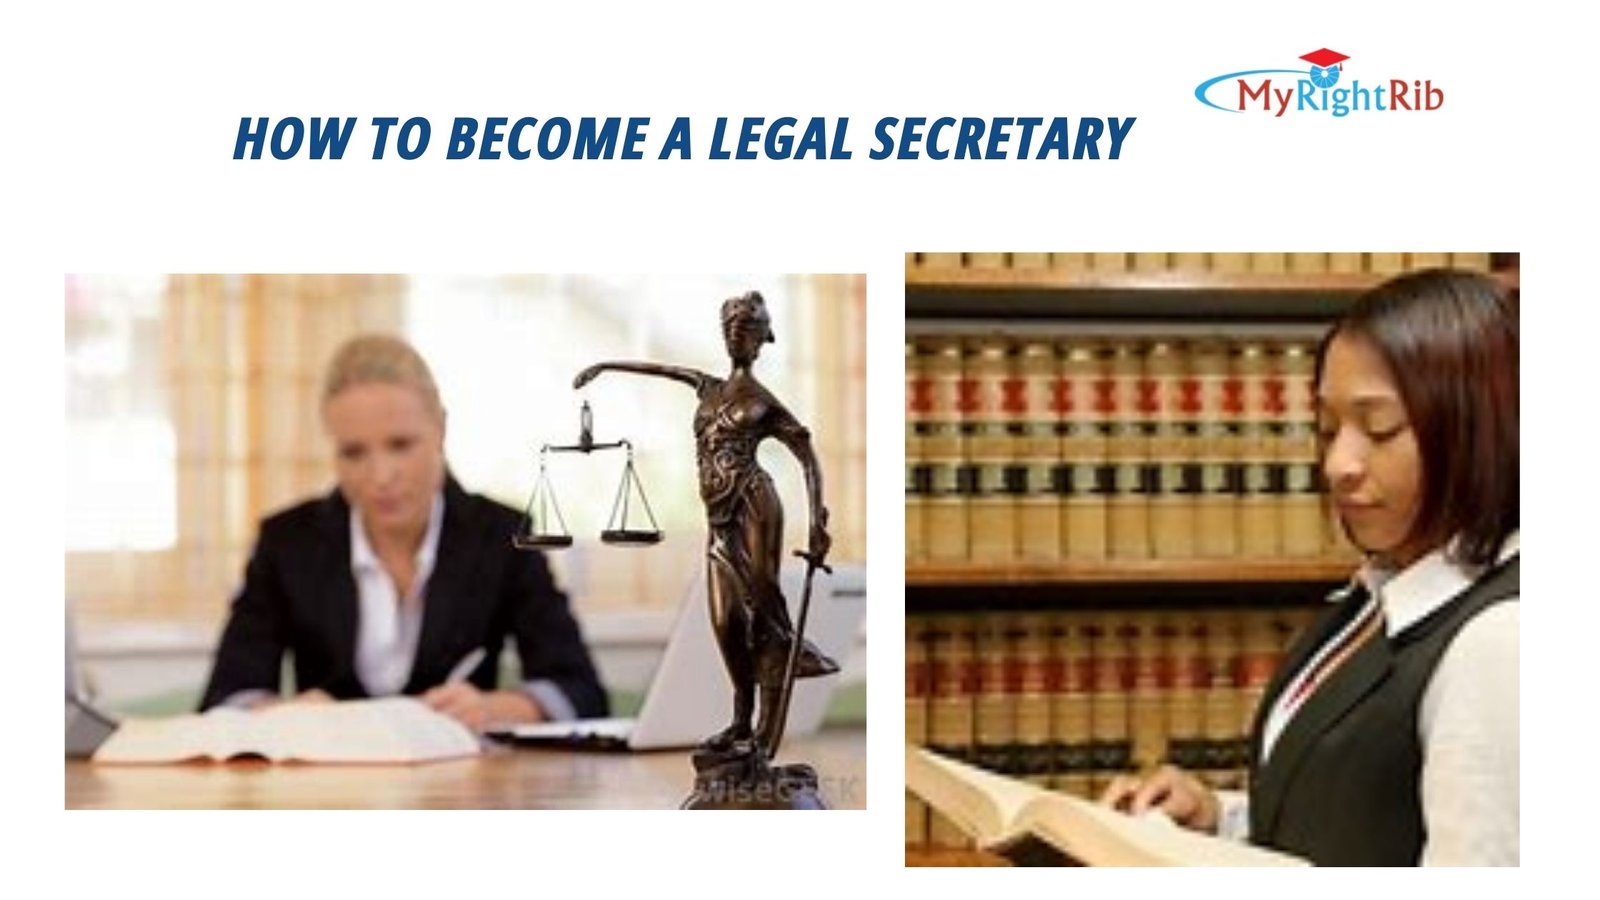 How to Become a Legal Secretary: Step by Step Guide